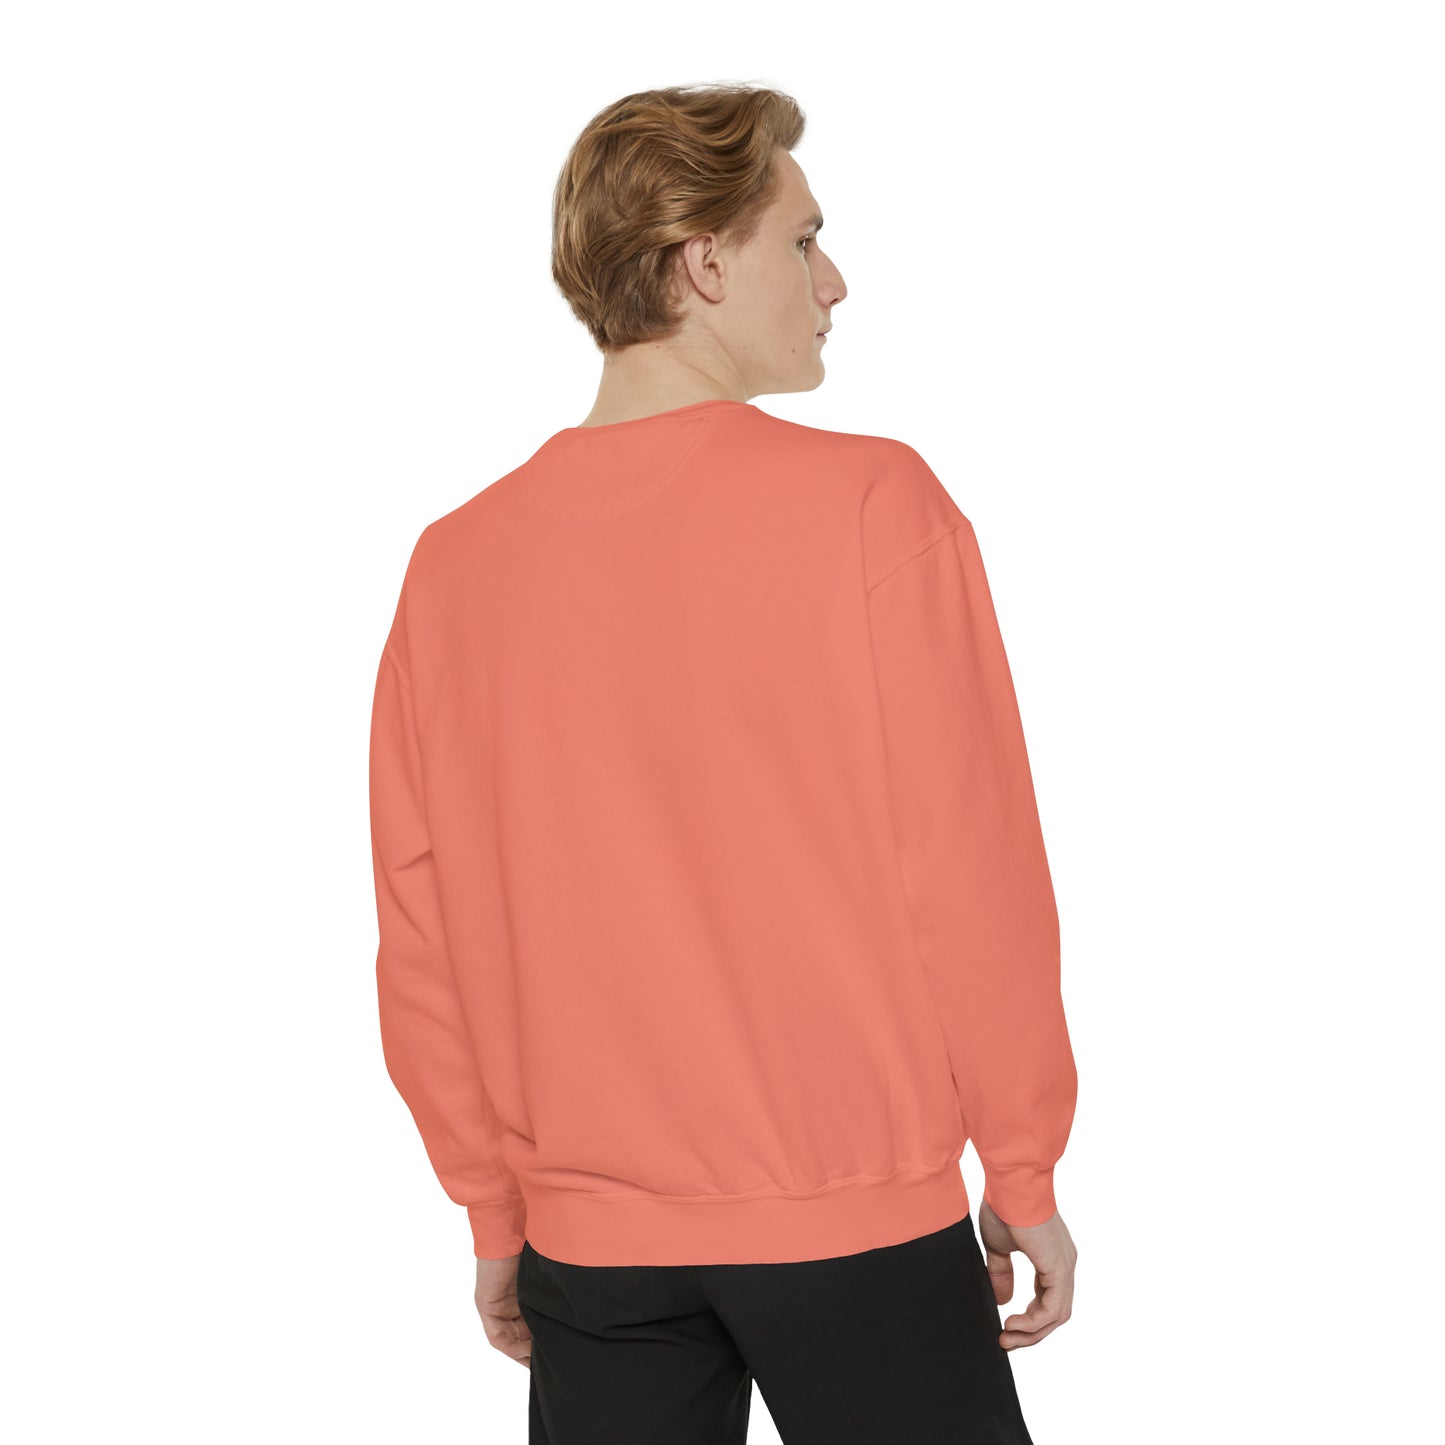 Less is More Garment-Dyed Sweatshirt